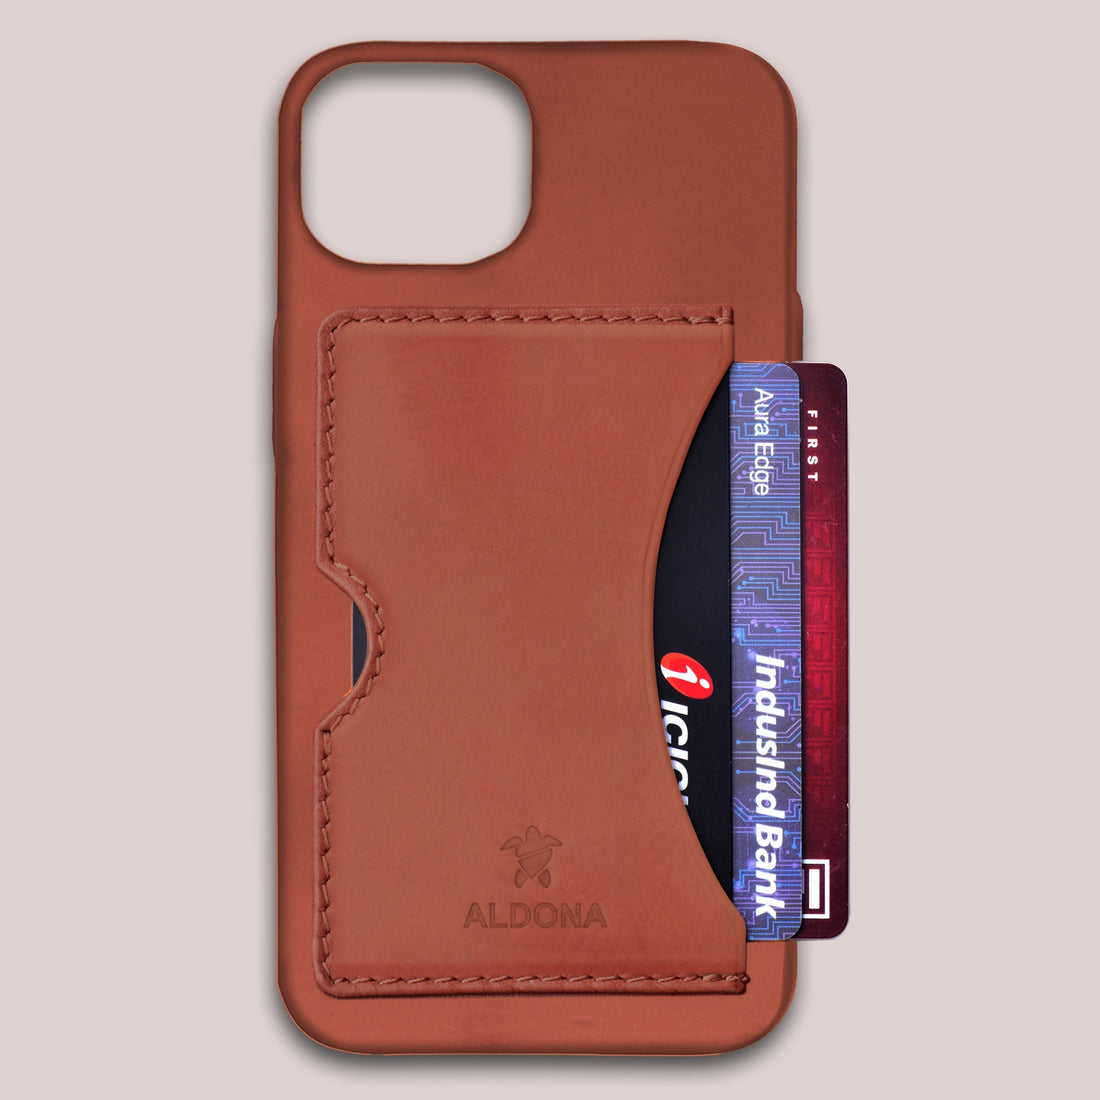 Baxter Card Case for iPhone 14 Pro Max - Cognac